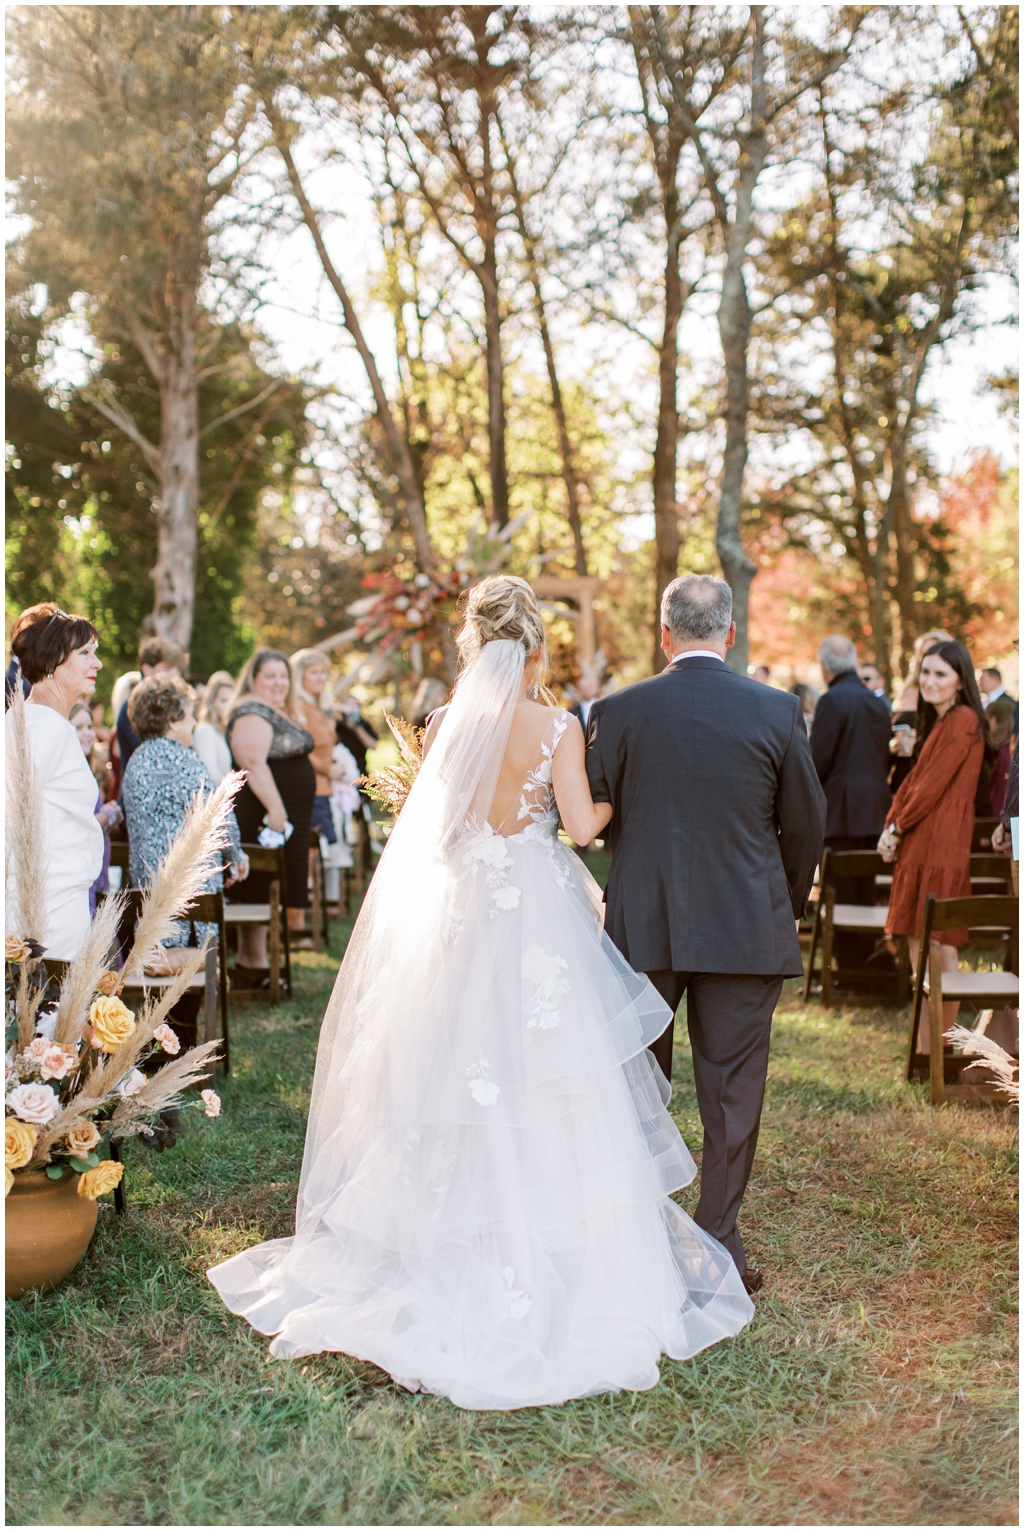 Emily Ann Roberts proceeds down the aisle at her fall Marblegate Farm wedding. 